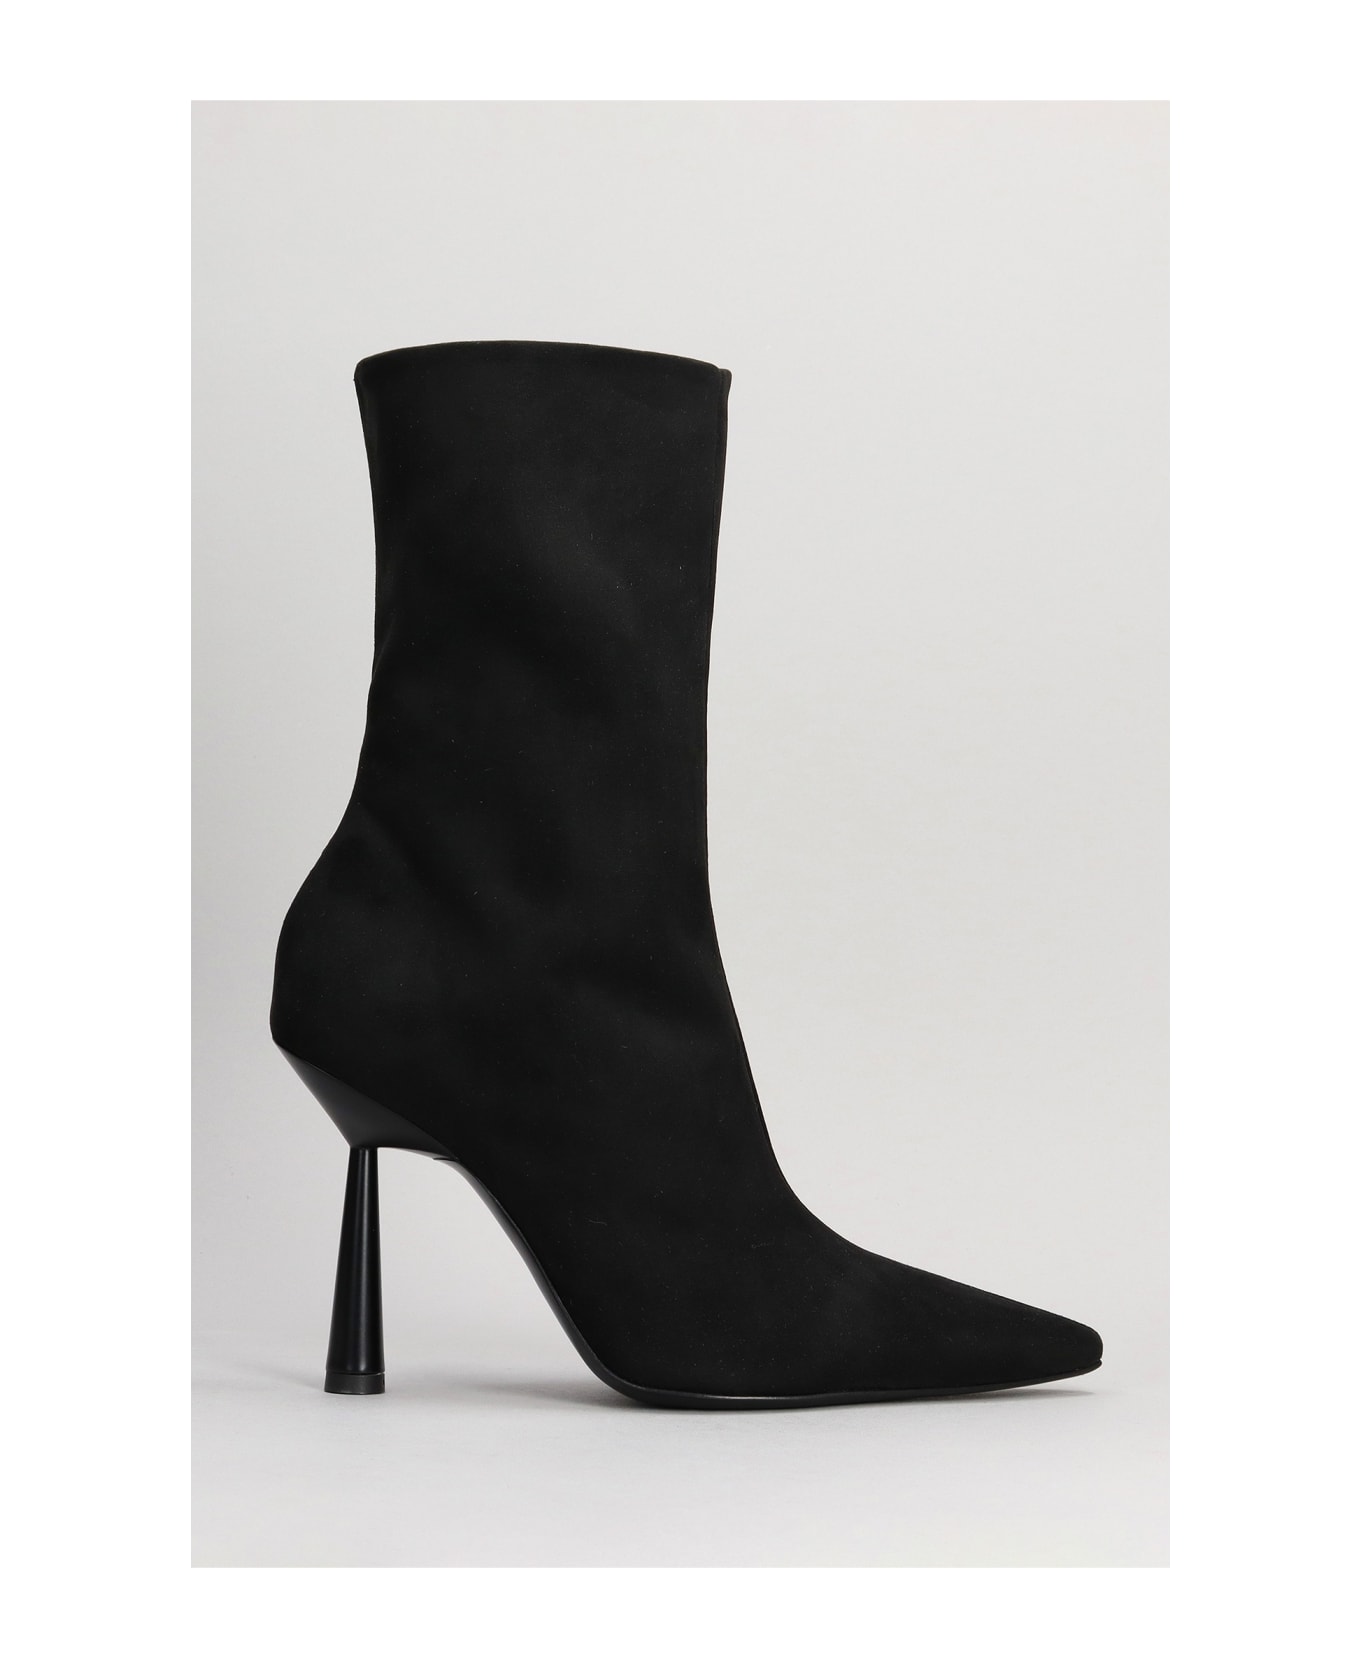 GIA BORGHINI Rhw7 High Heels Ankle Boots In Black Suede - black